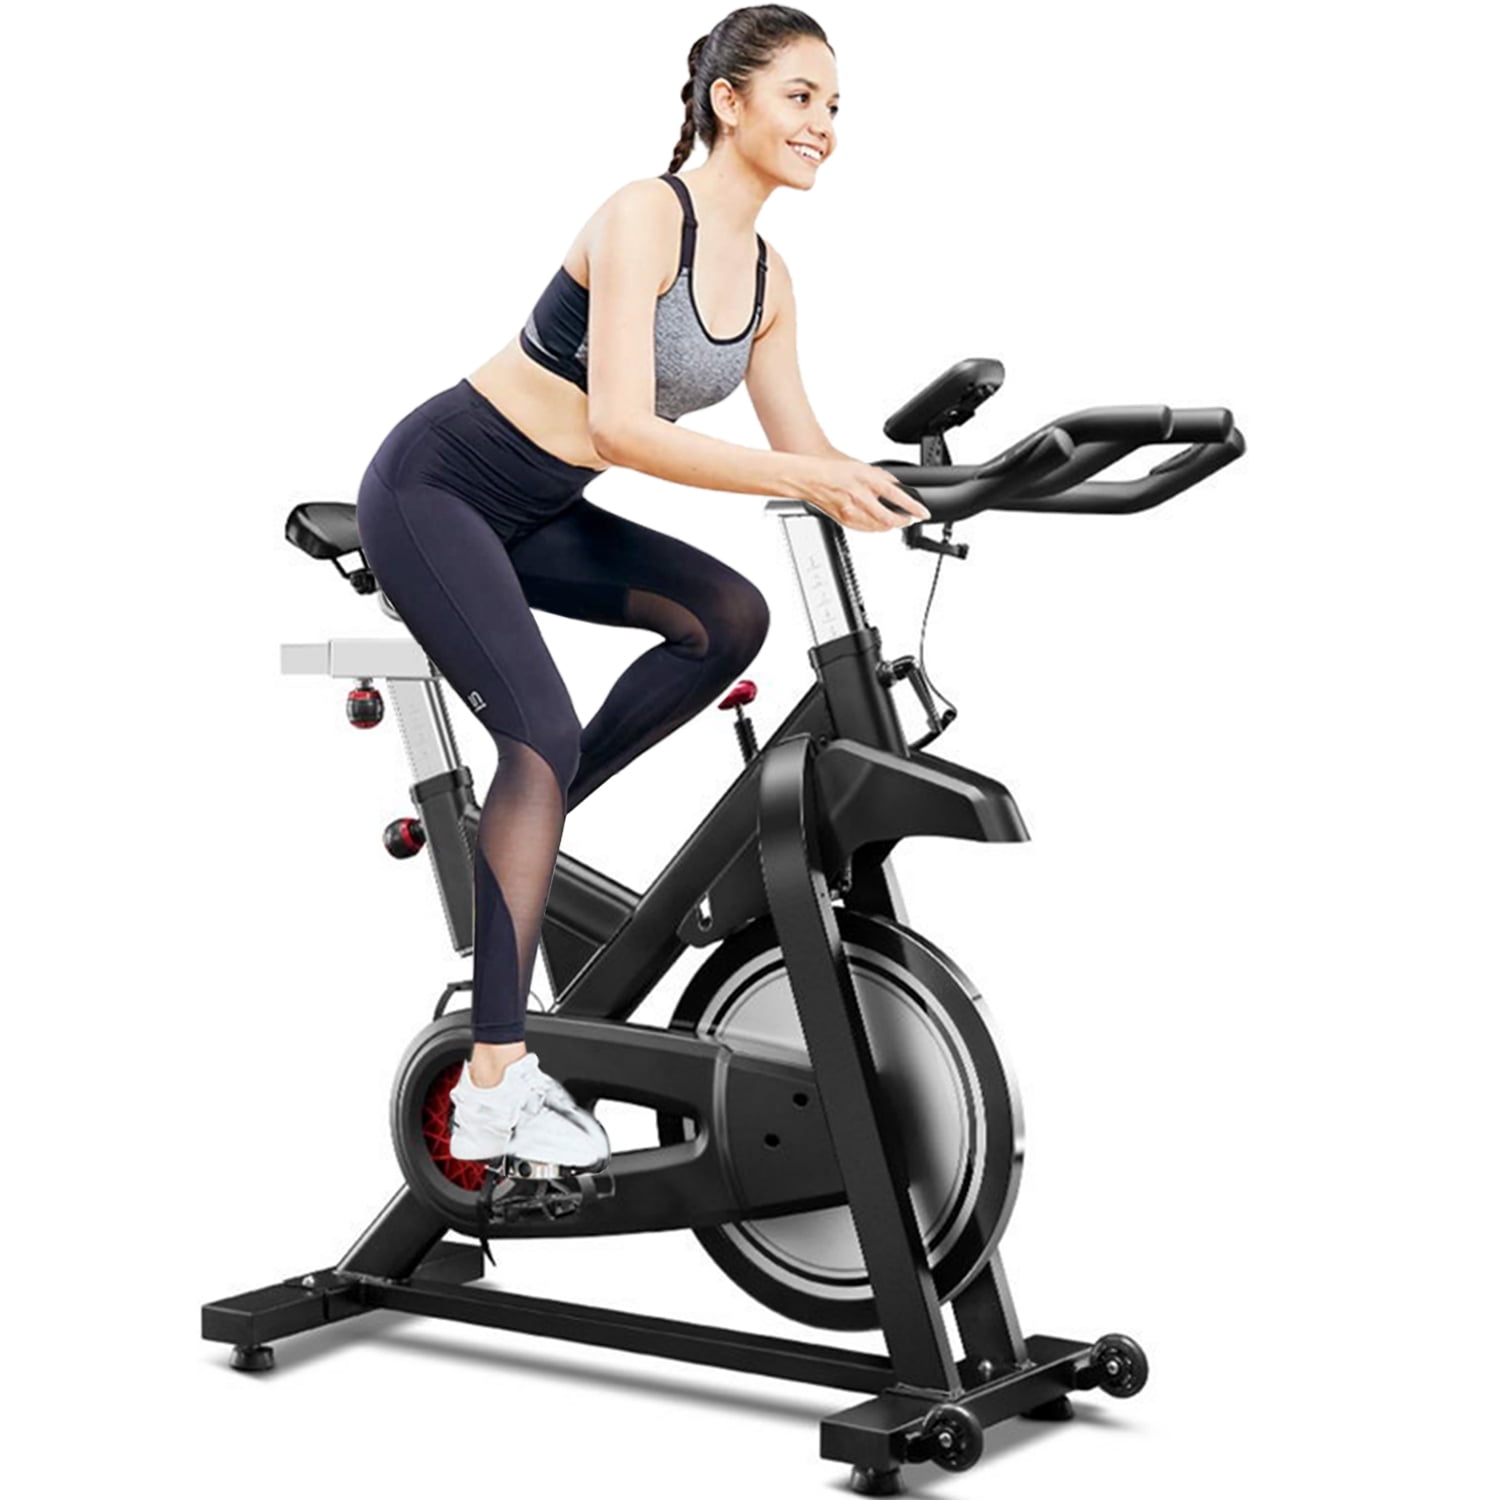 Details about   Exercise Bike with Desktop EB-07 Indoor Workout Bike Foldable Home Office Gym 